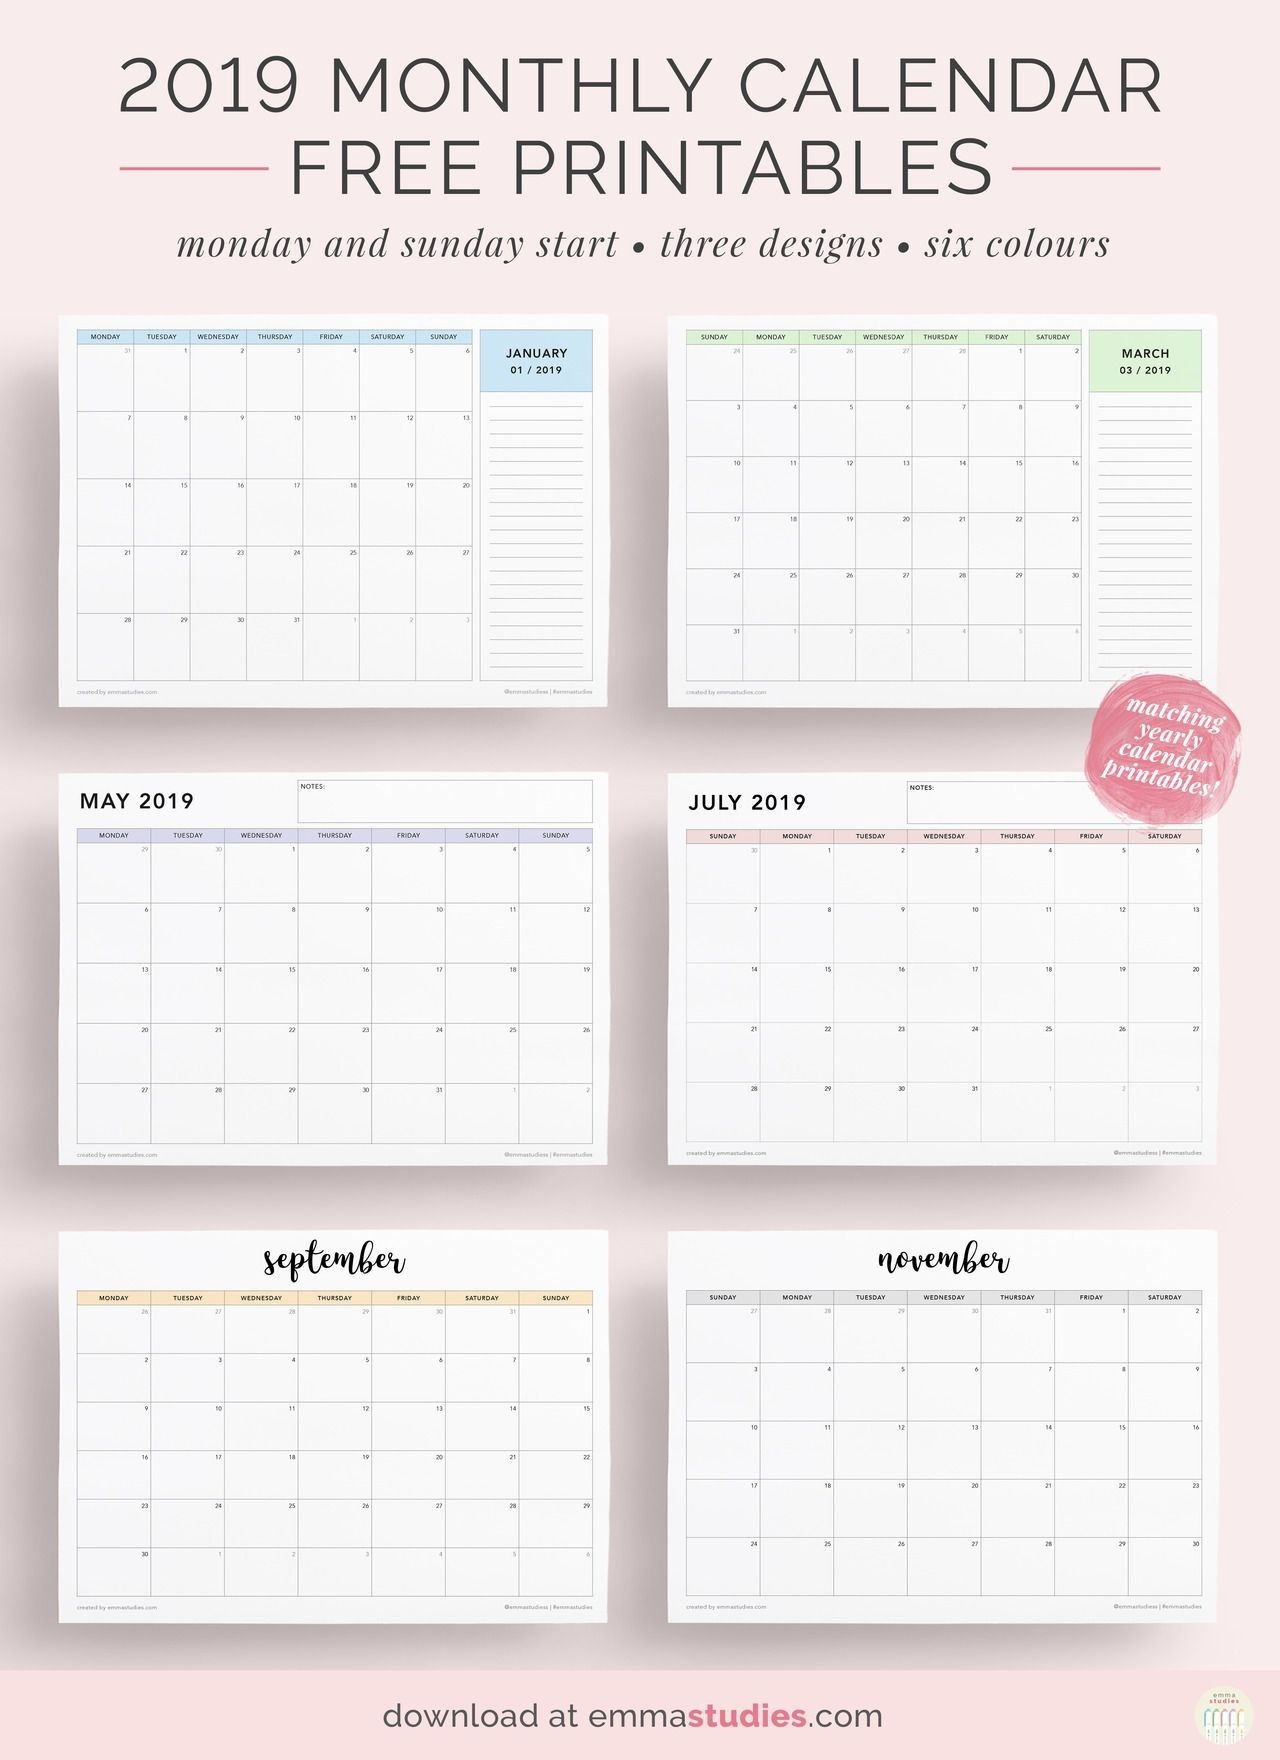 Free 2019 Monthly Landscape Calendar Printableshere Is A